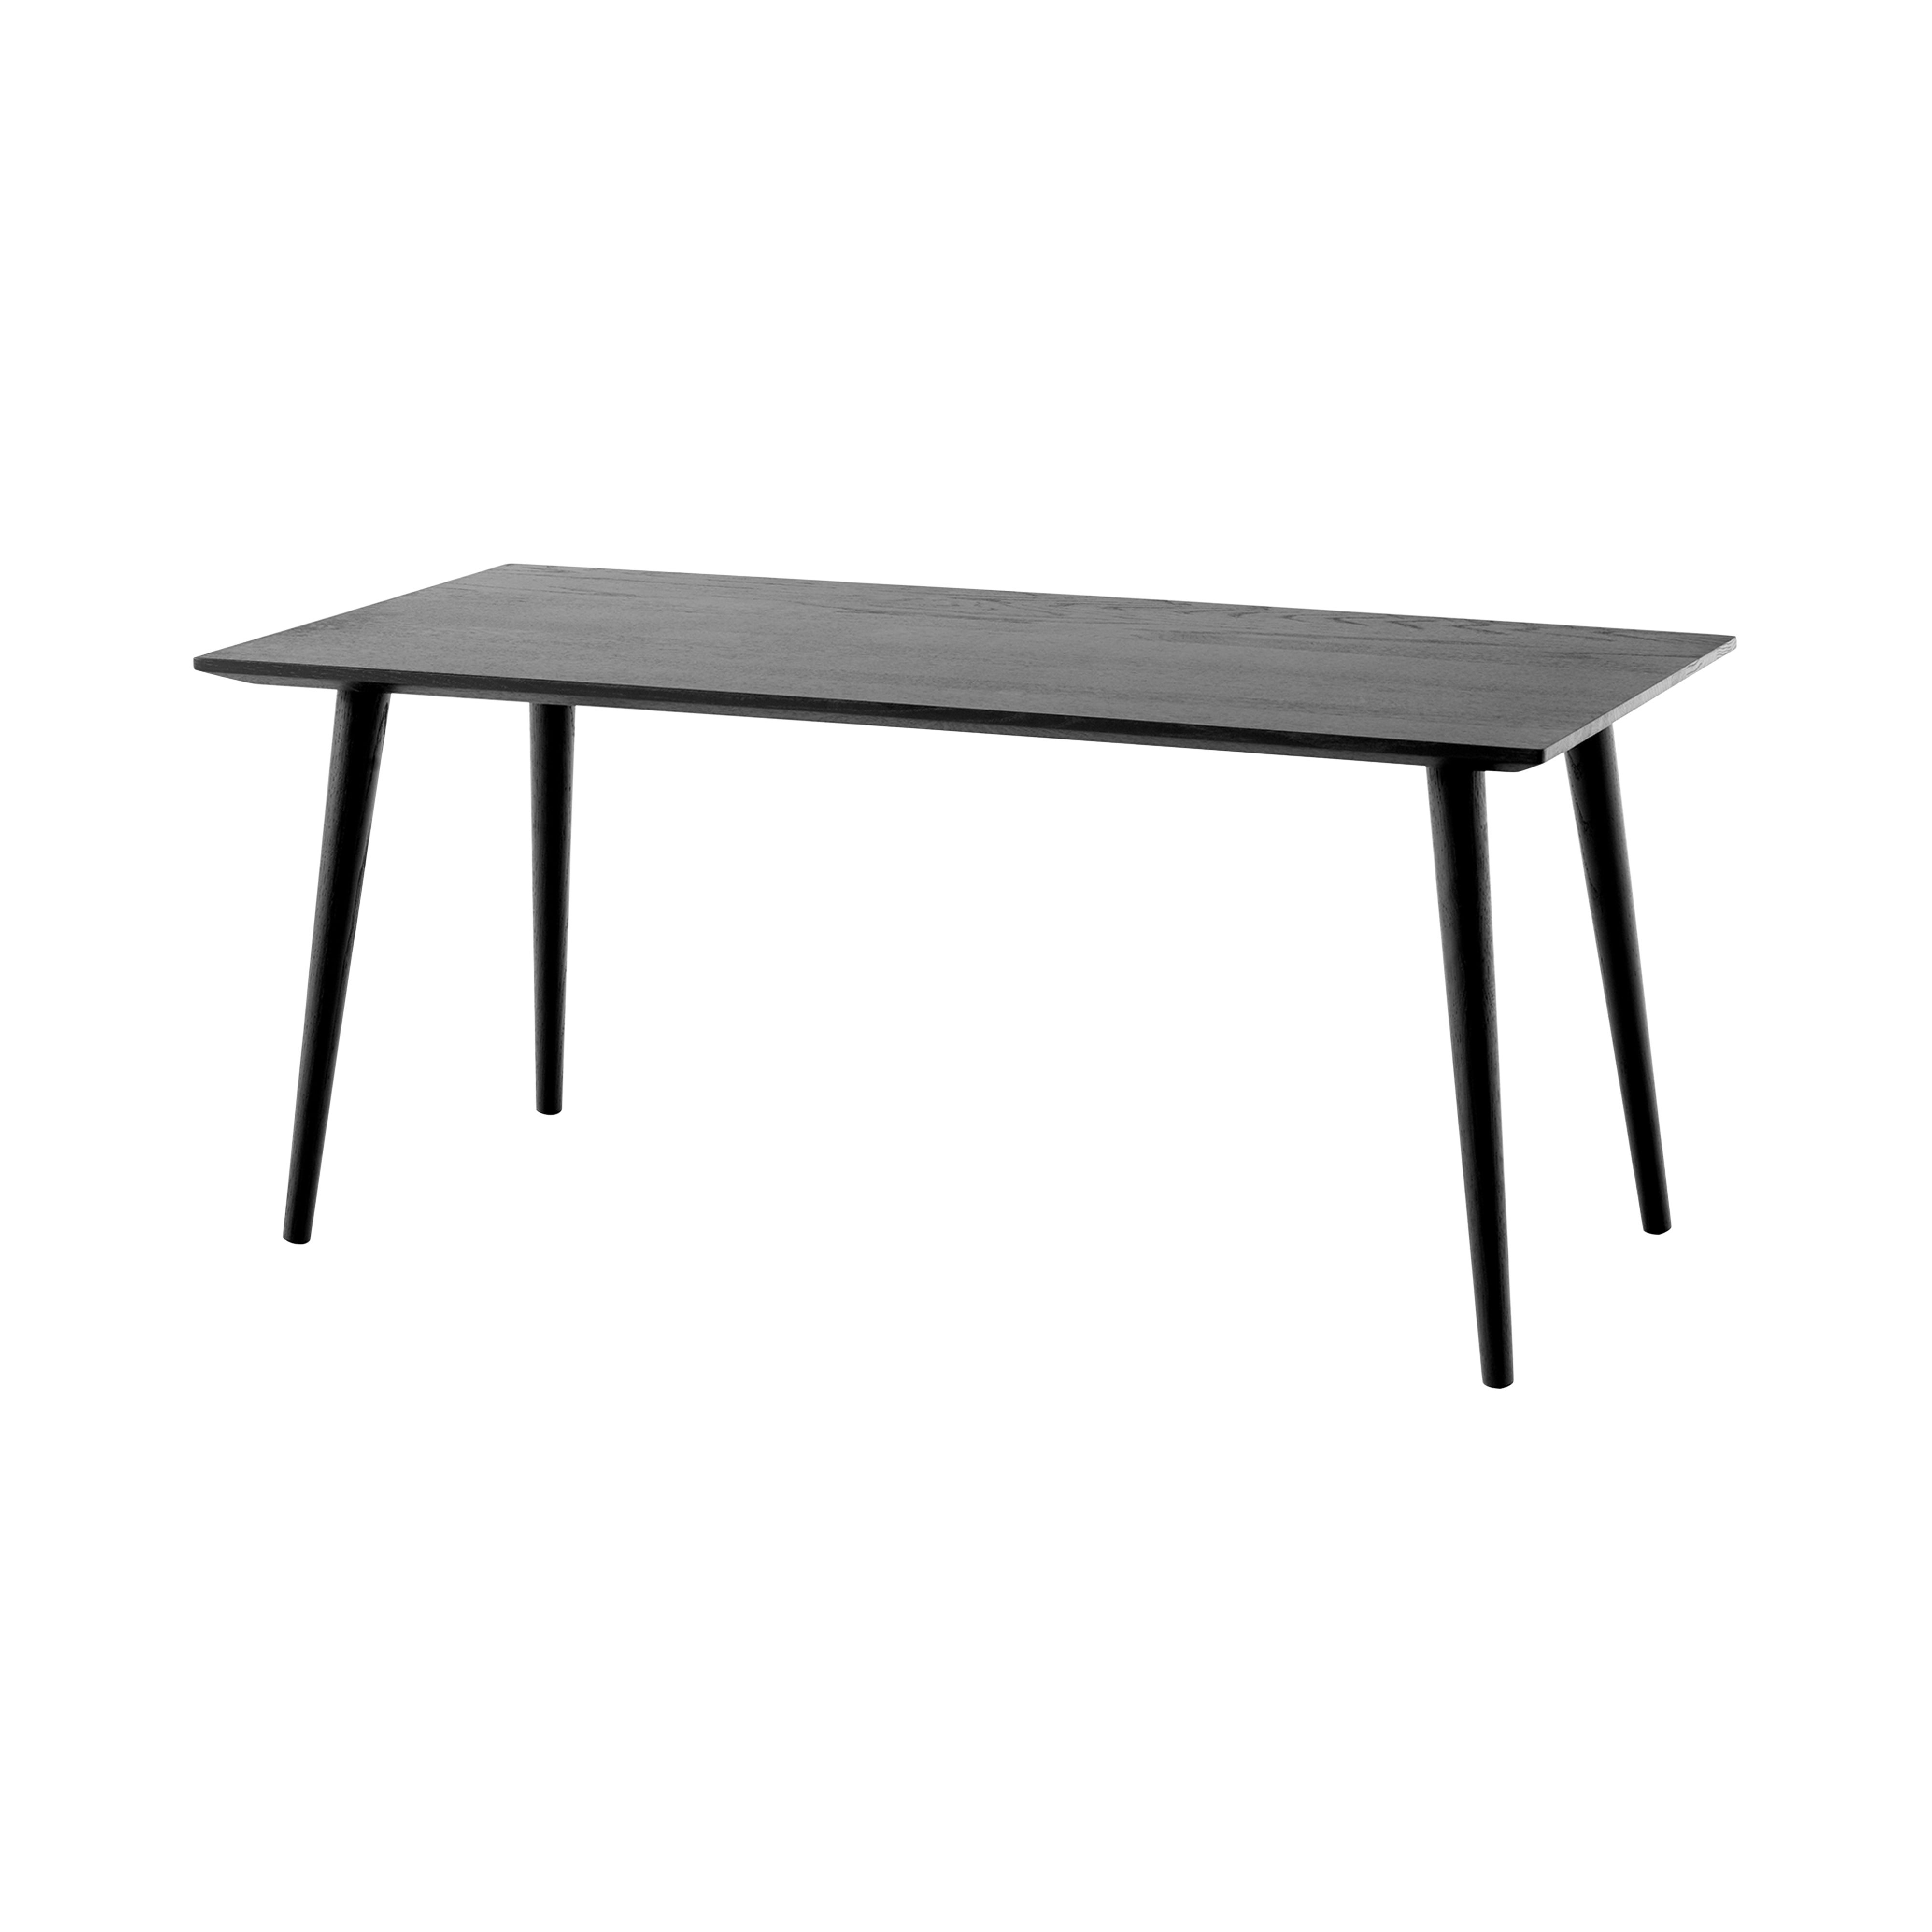 In Between Lounge Table: SK23 + SK24 + Rectangle (SK23) + Black Lacquered Oak